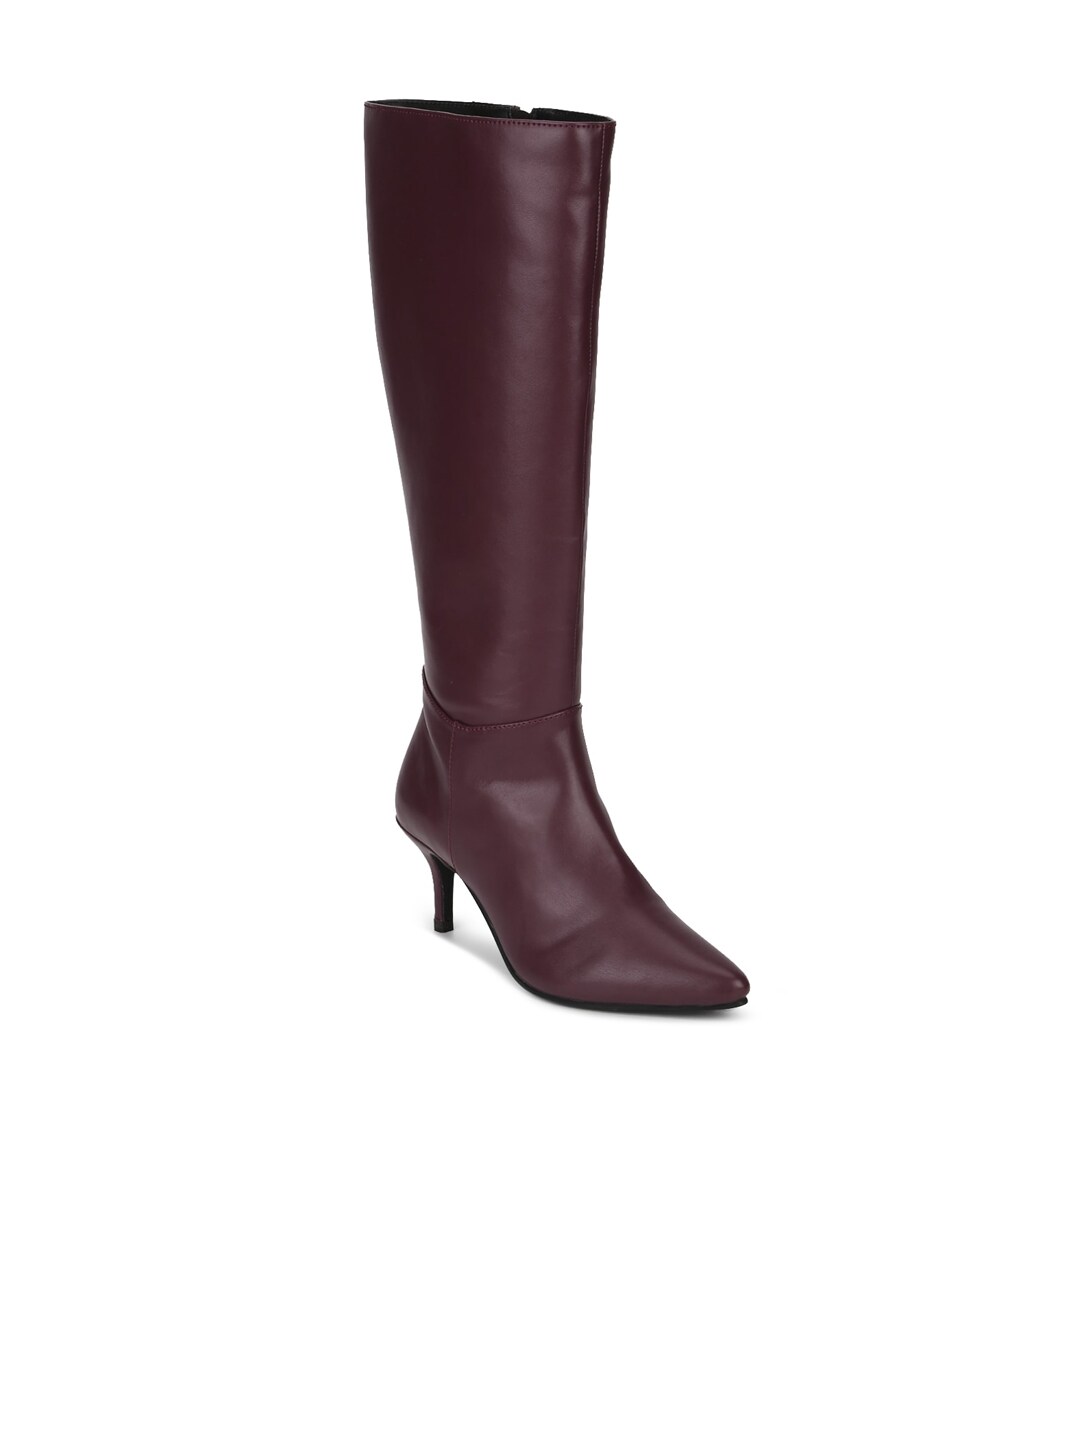 Truffle Collection Burgundy PU High-Top Kitten Heeled Boots Price in India